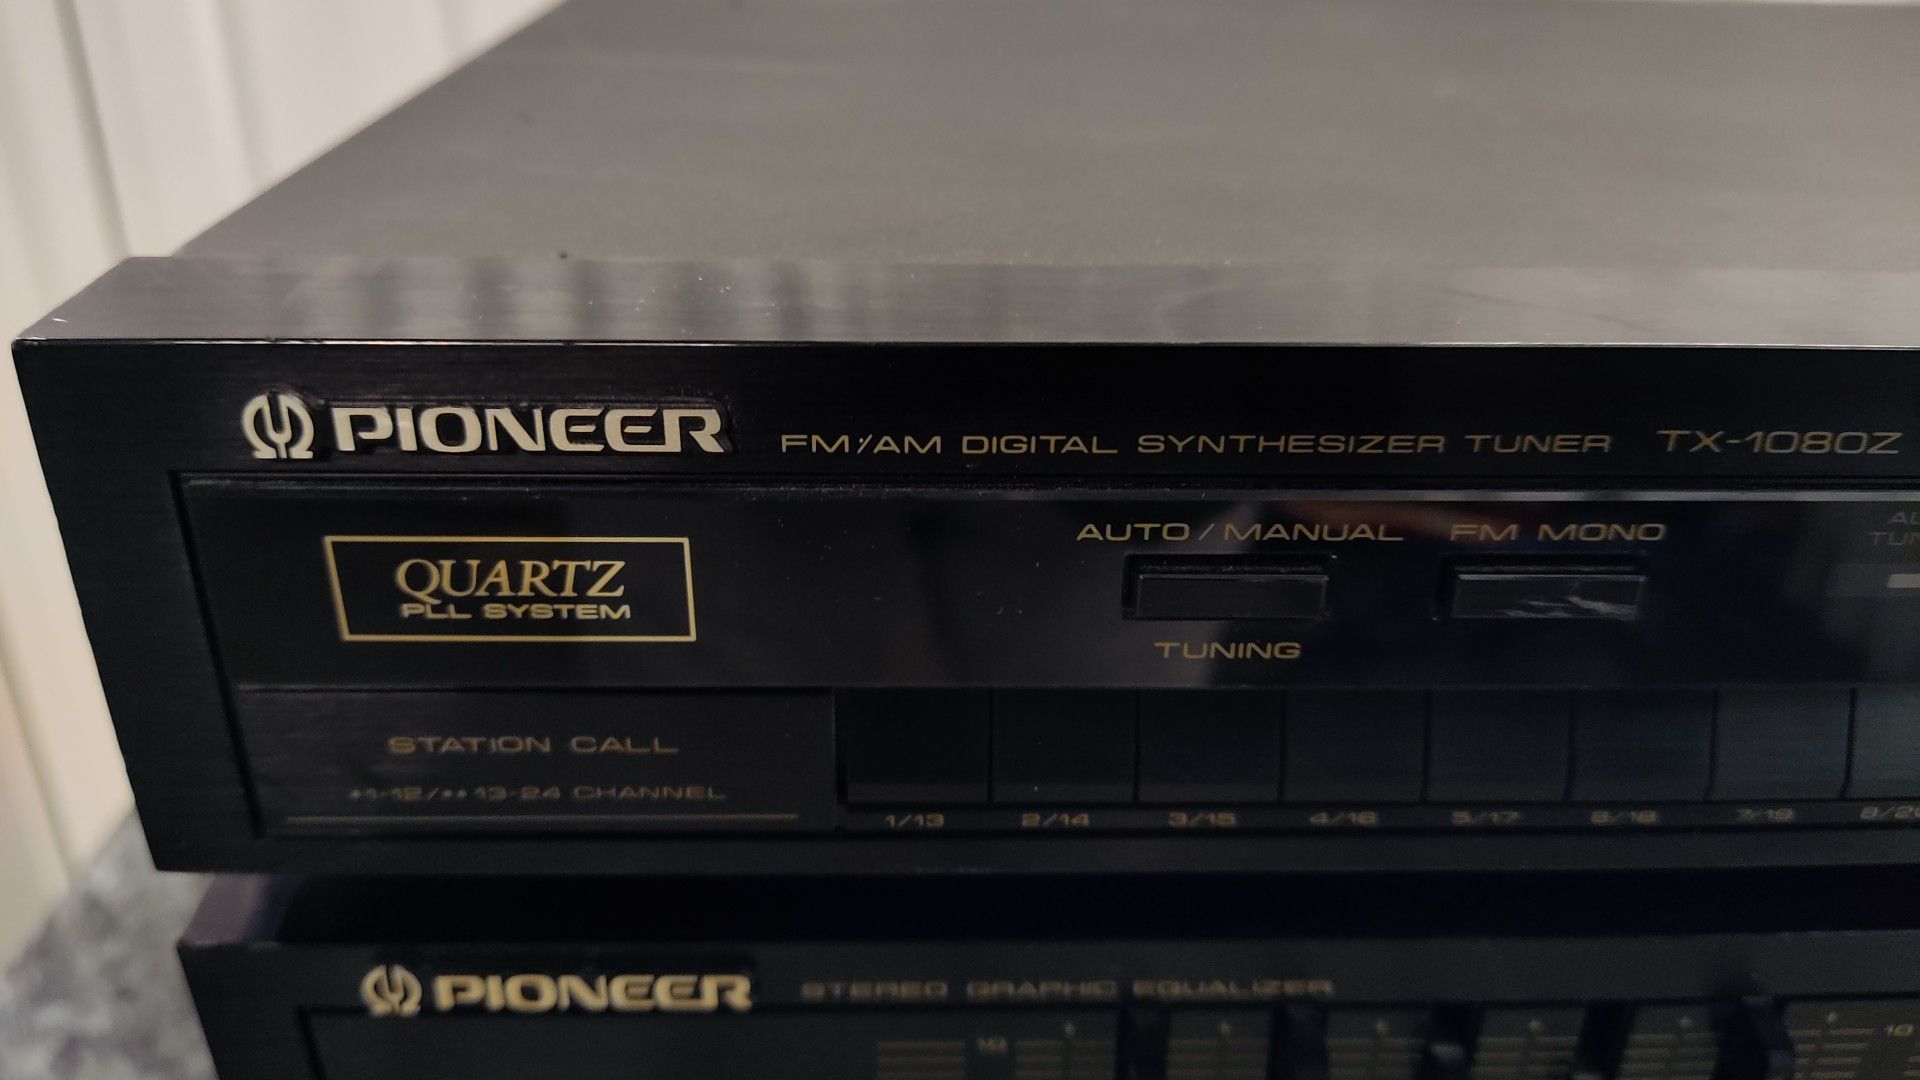 PIONEER STEREO AMPLIFIER SA 1280 AND TX-1080 TUNER.